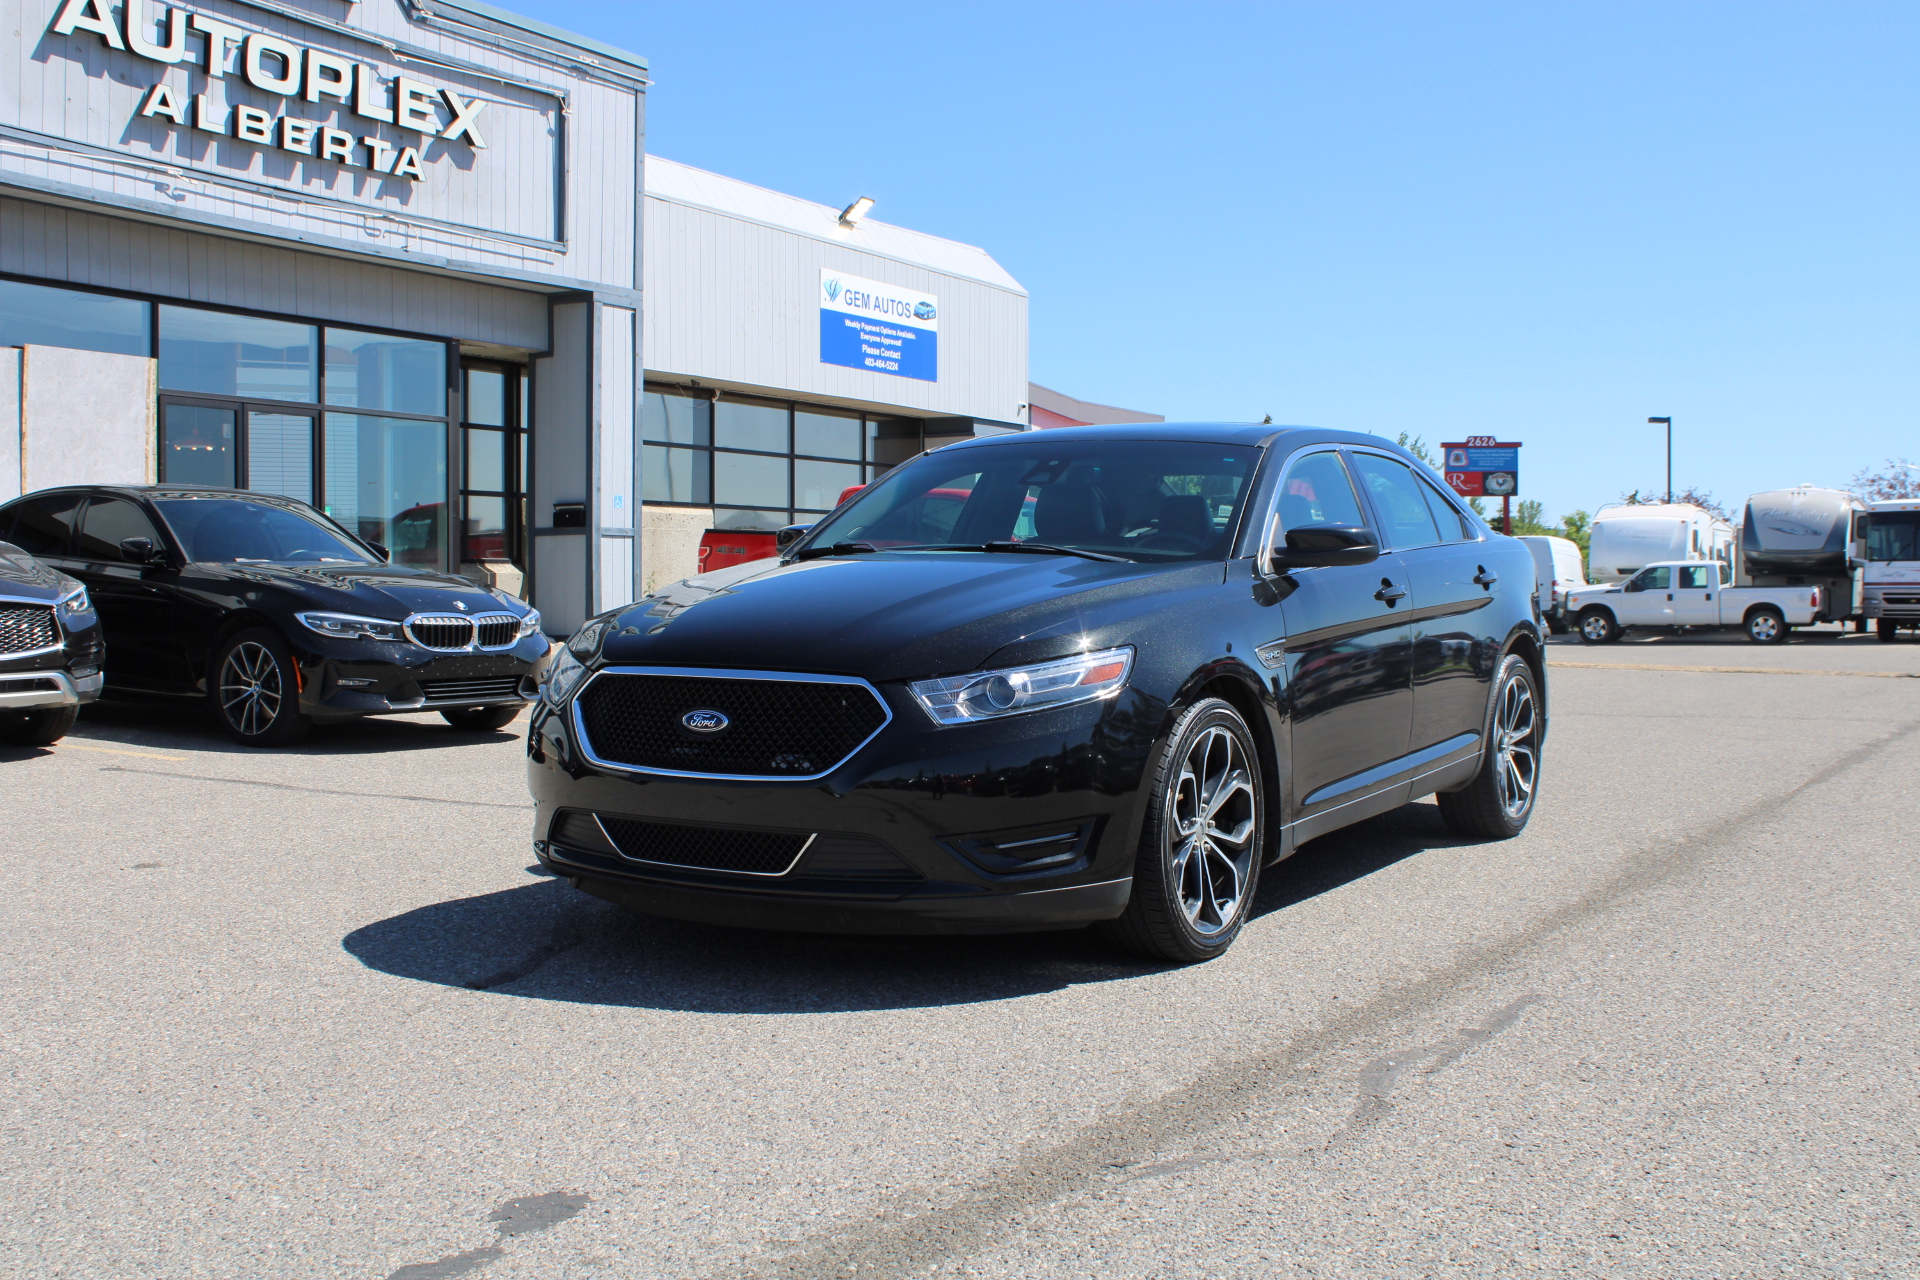 Used 2014 Ford Taurus SHO AWD in Airdrie Alberta